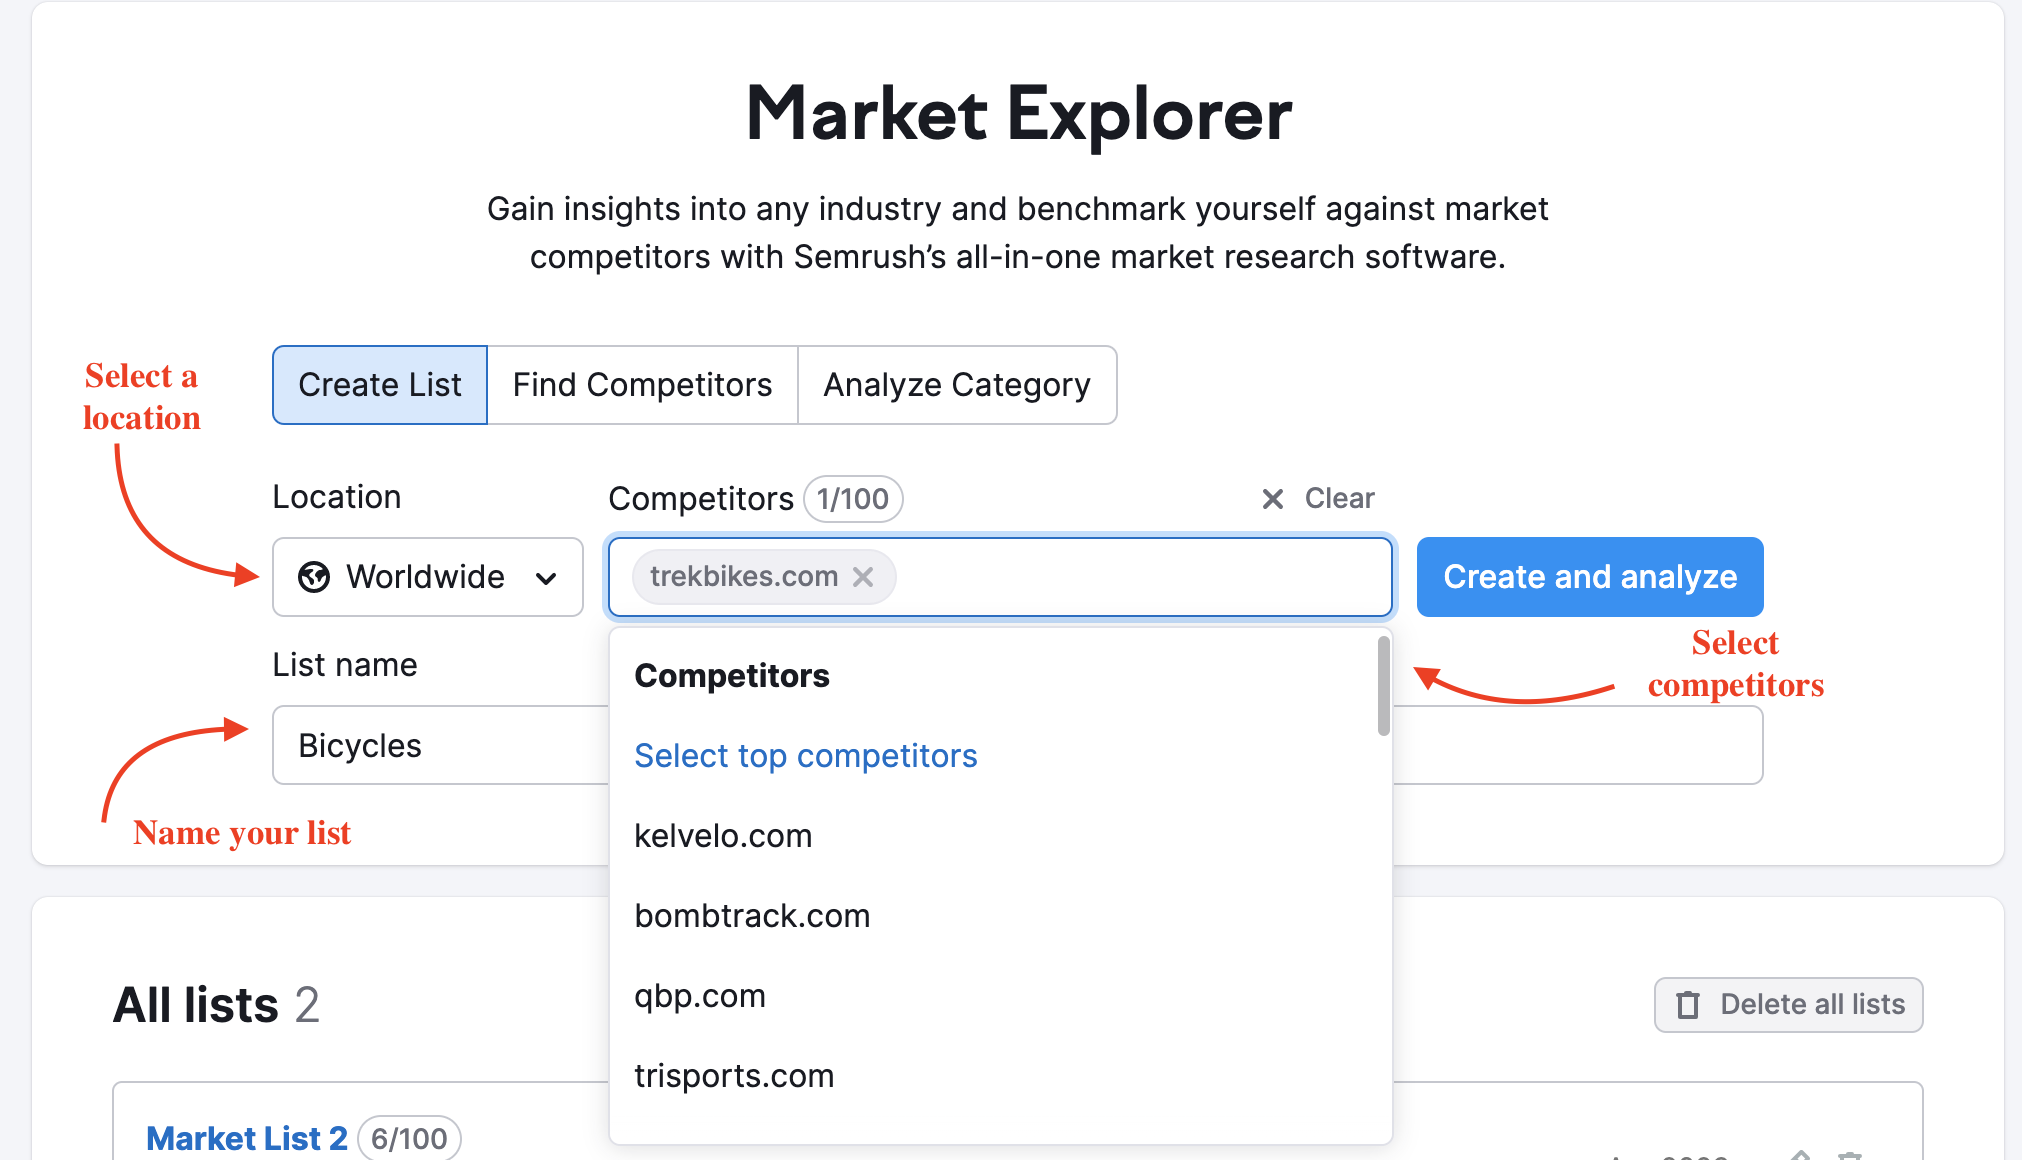 Market Explorer landing page with red arrows pointing to the Location button to select location, List Name, competitors, and a field to enter competitors with trekbikes.com as an example. When you start adding websites, a drop-down menu with possible competitors appears.